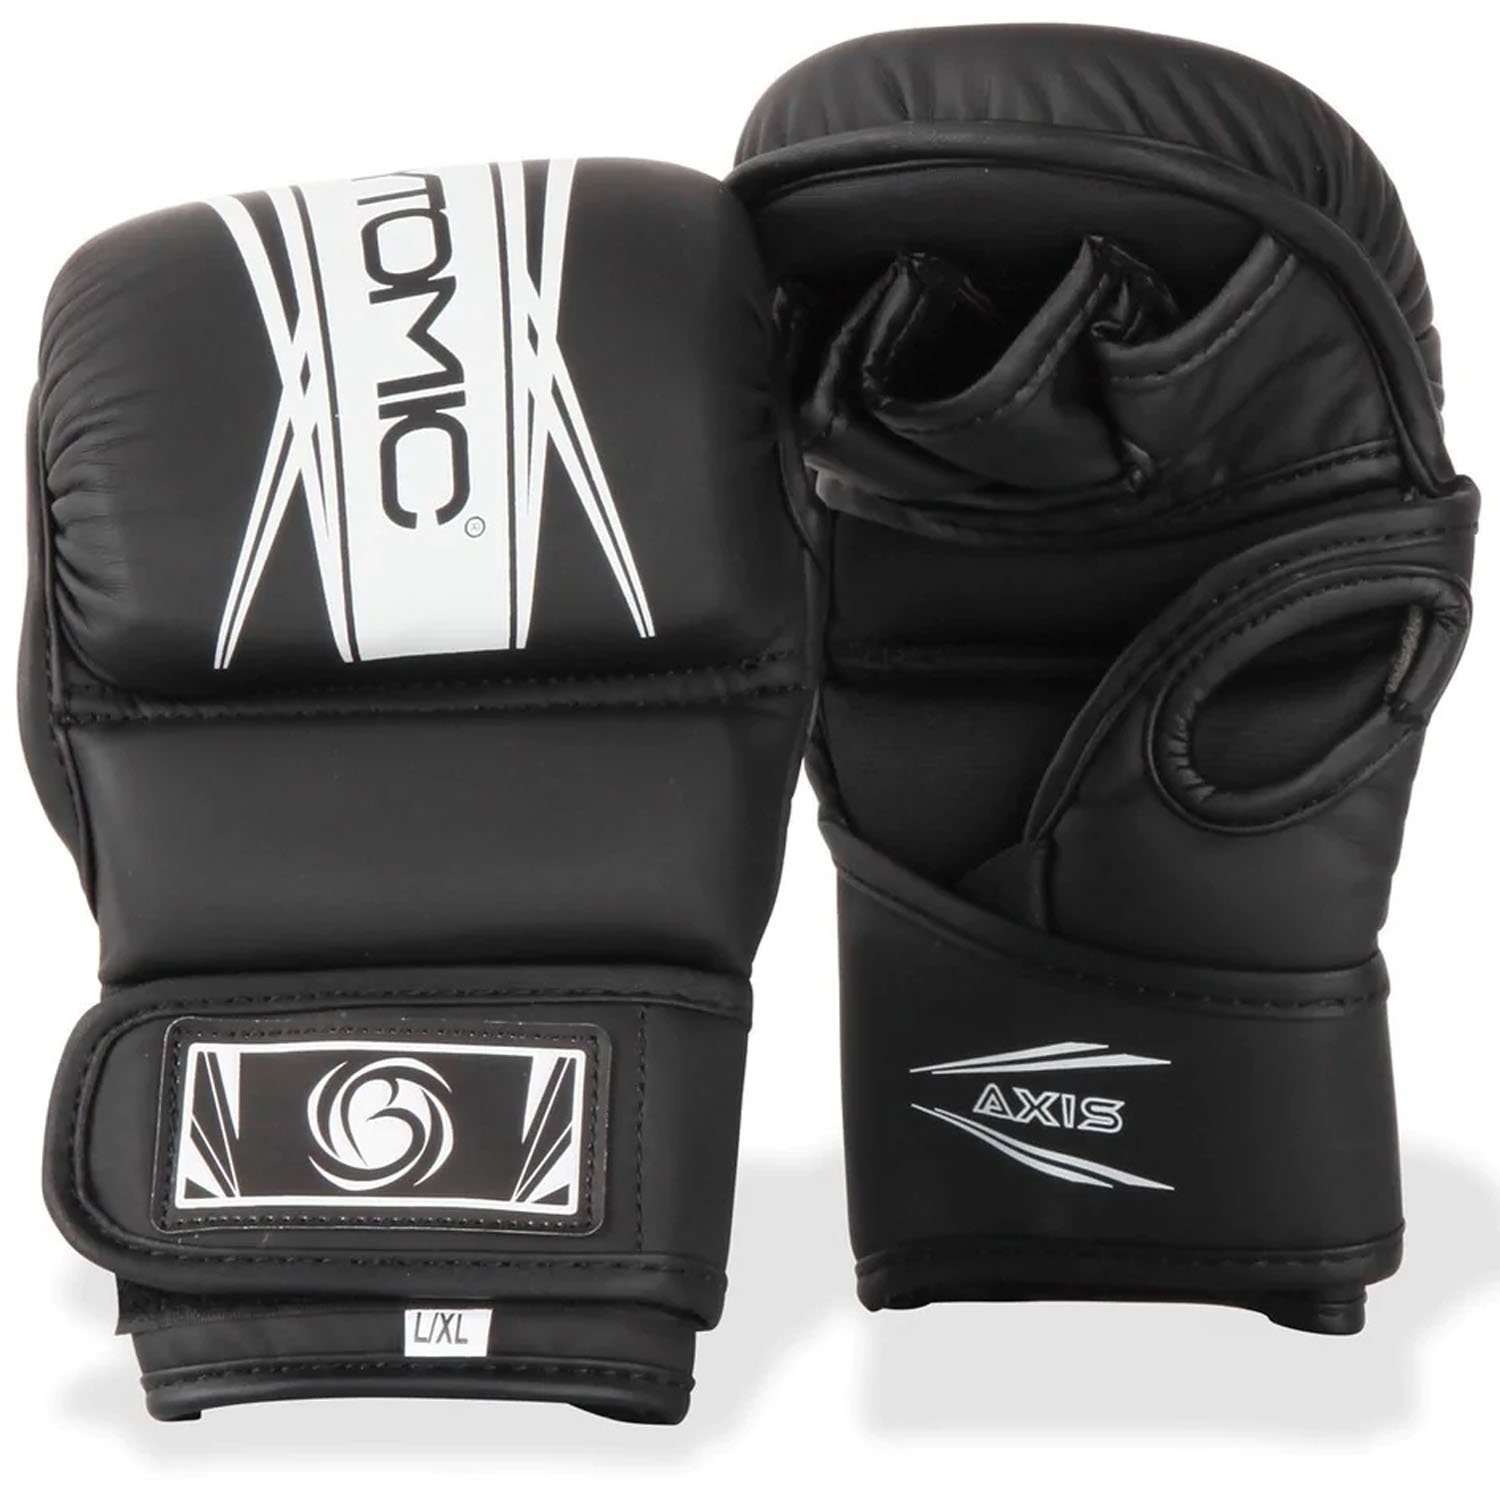 Bytomic MMA Sparring Boxhandschuhe, Axis, V2, schwarz-weiß, S/M